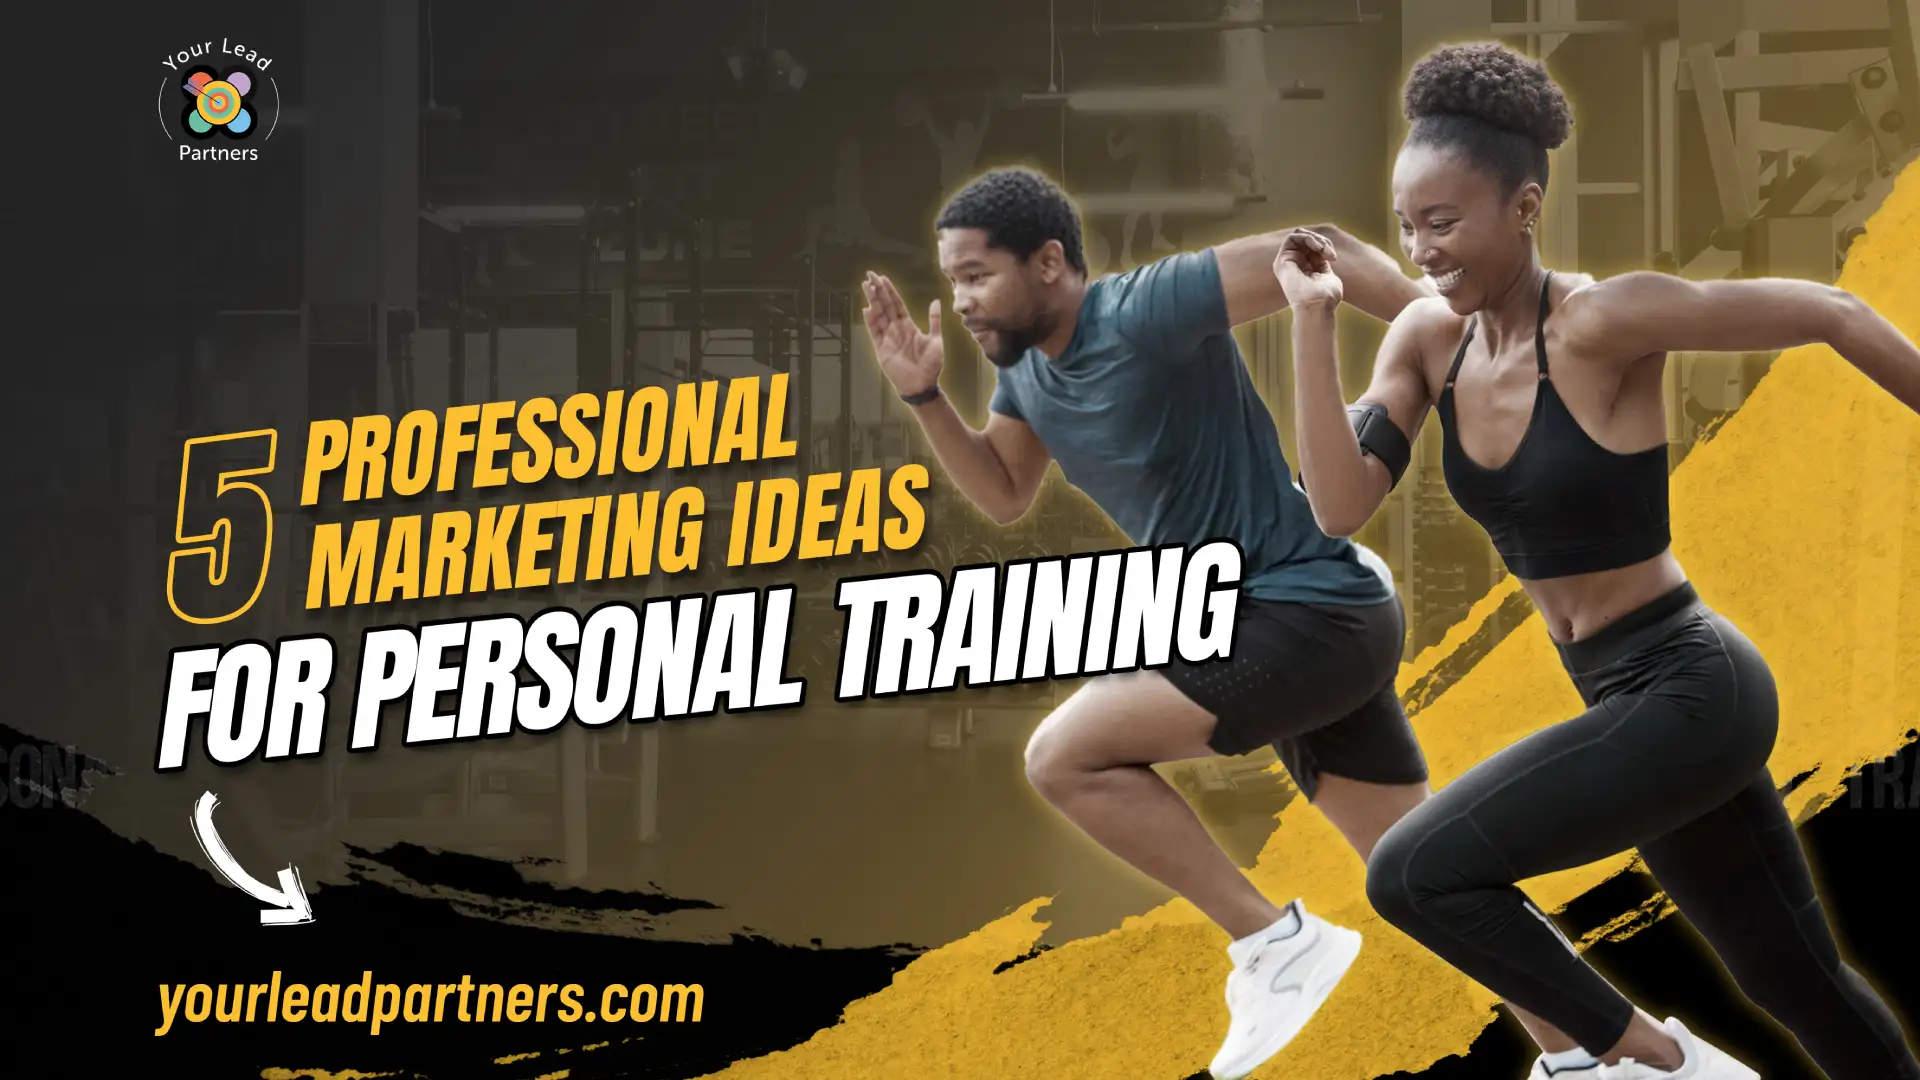 5 Professional Marketing Ideas for Personal Training